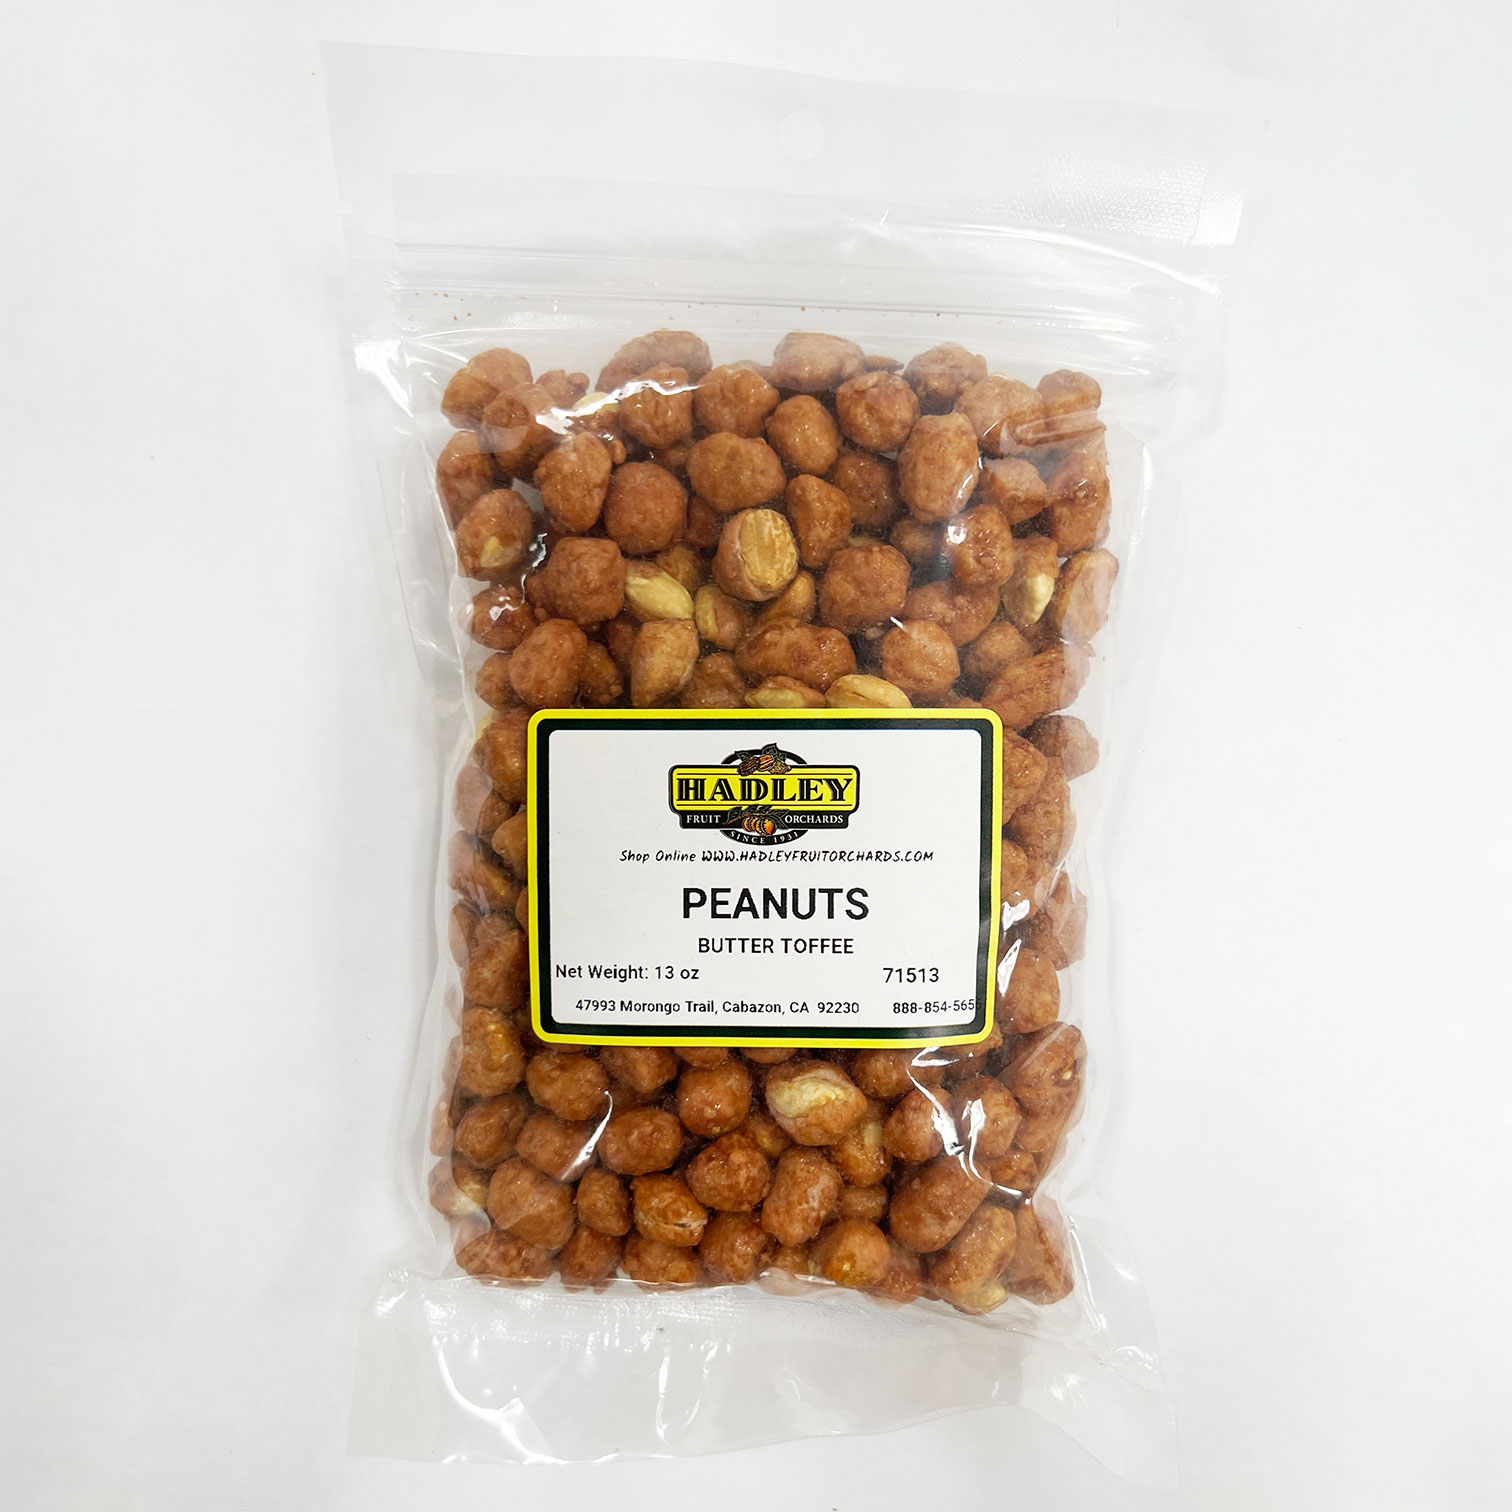 Peanuts-Butter-Toffee-13oz